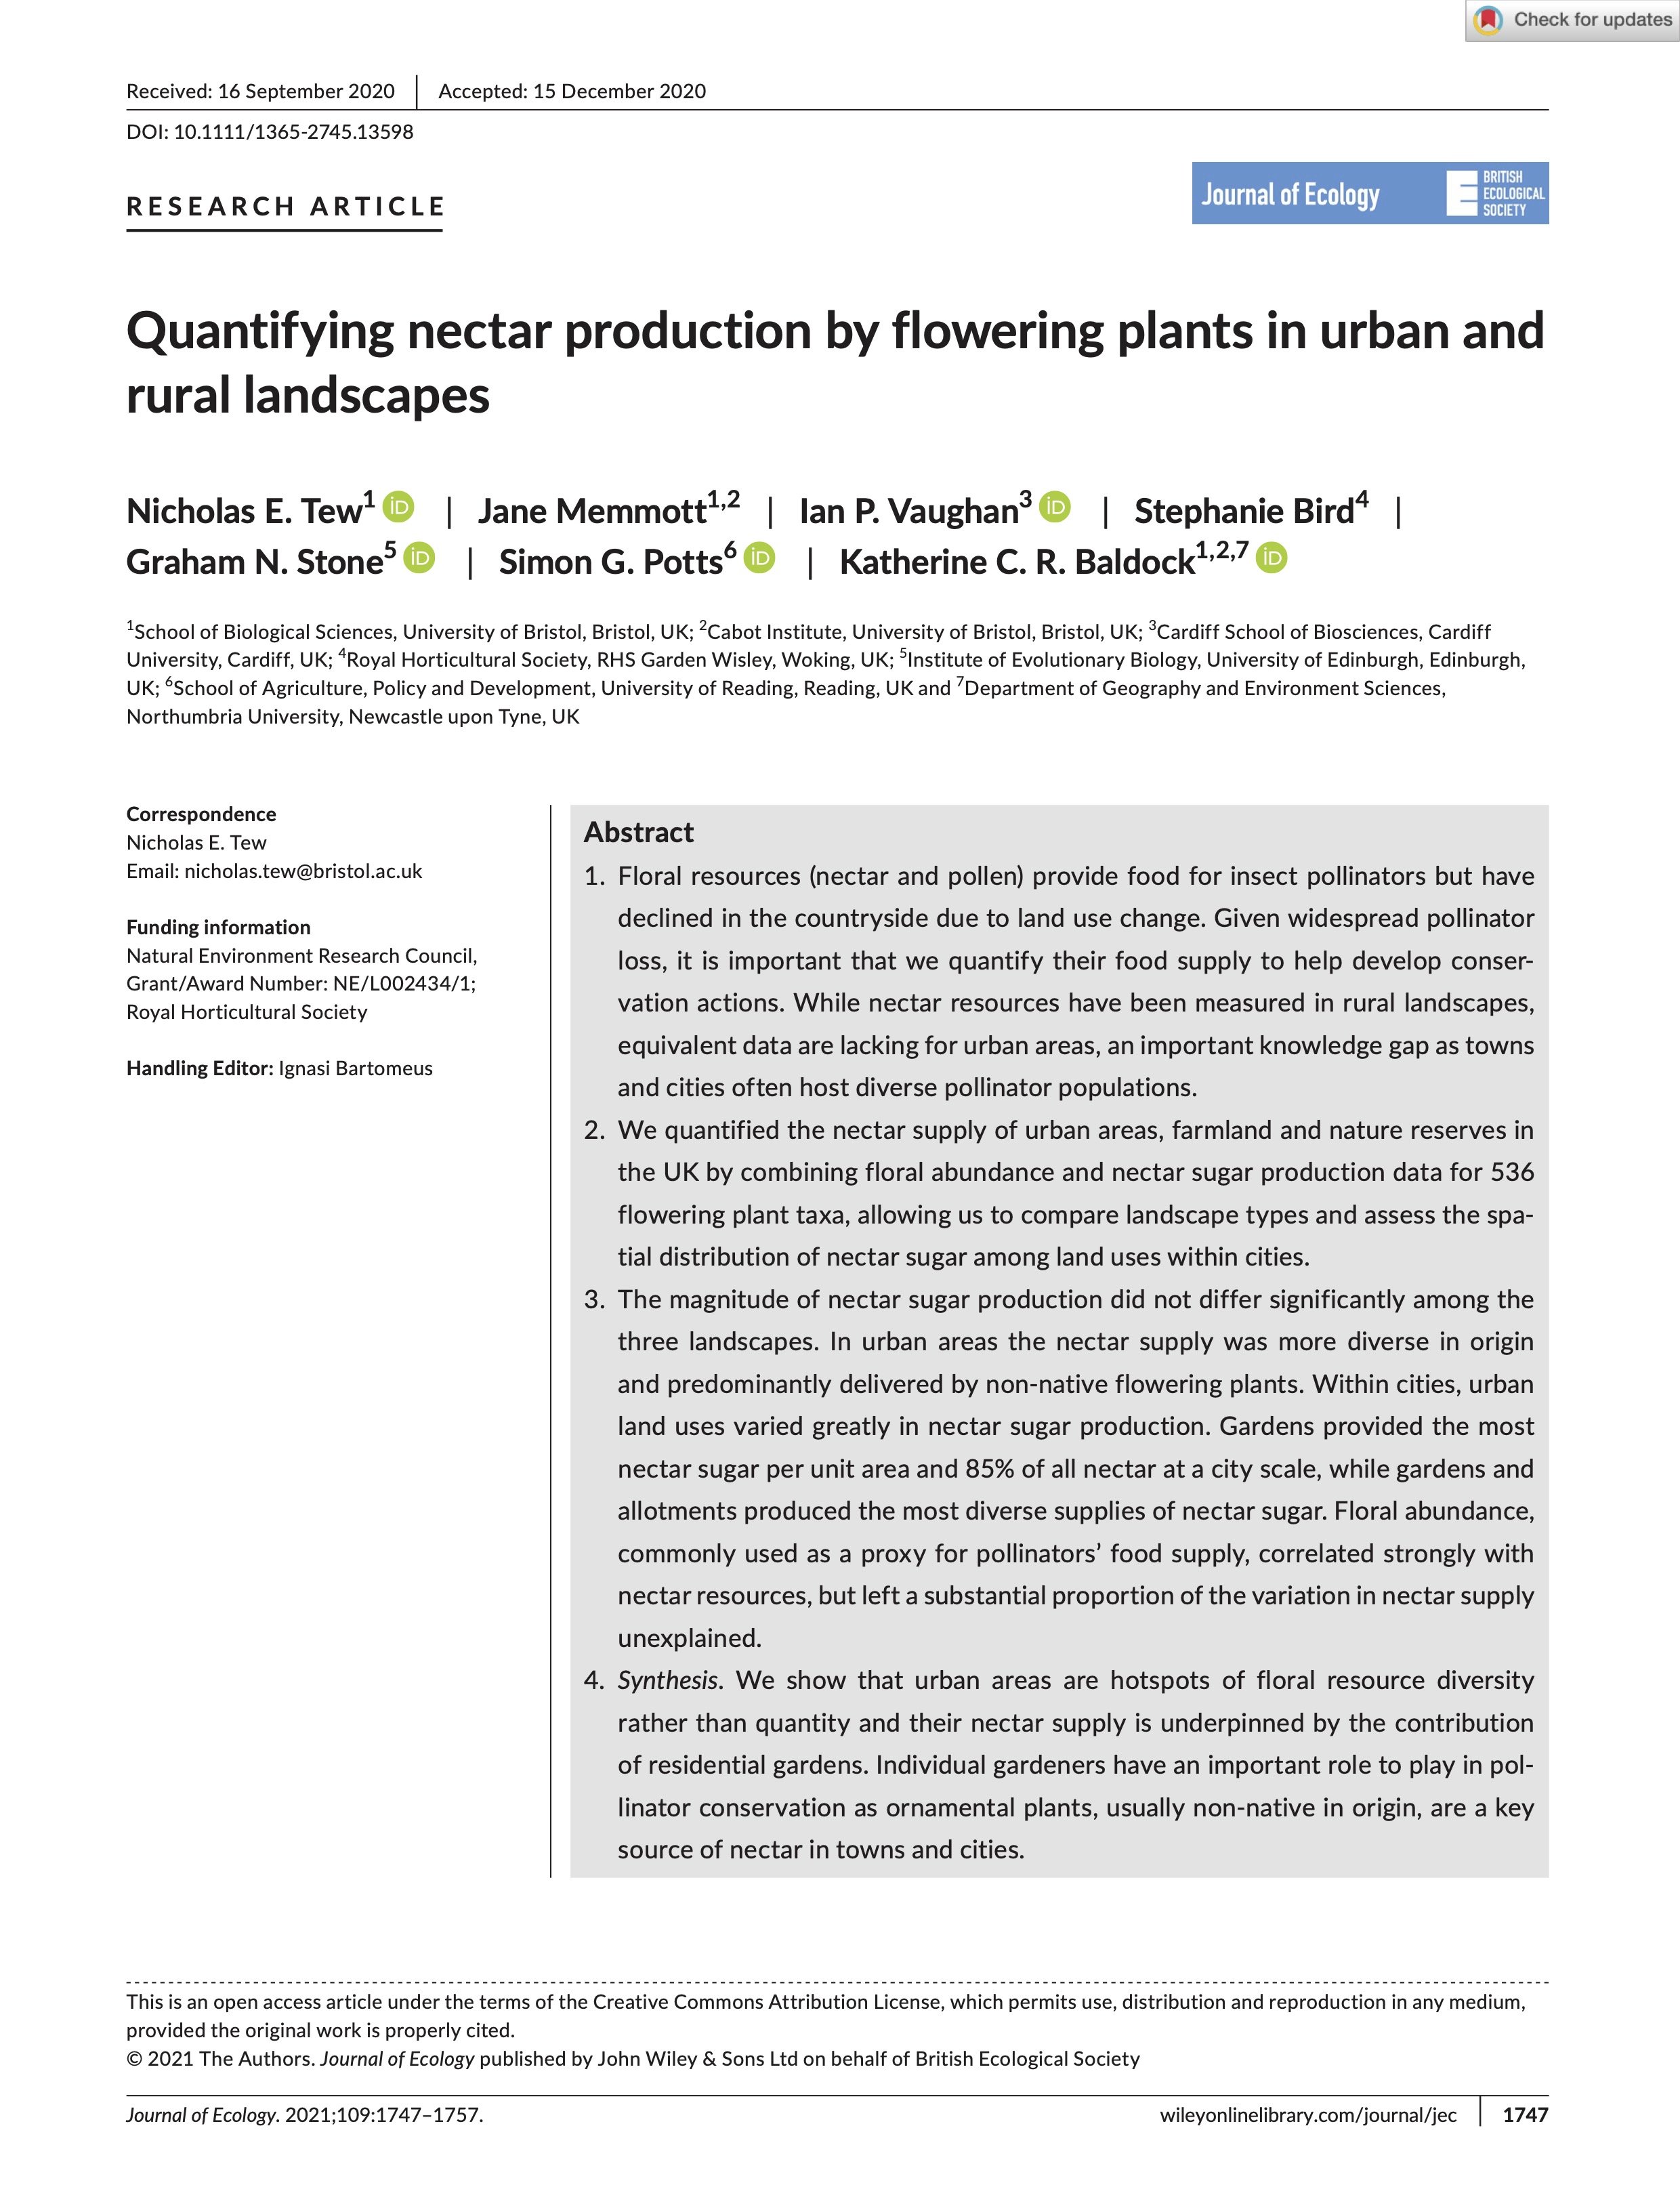 Quantifying nectar production by flowering plants in urban and rural landscapes